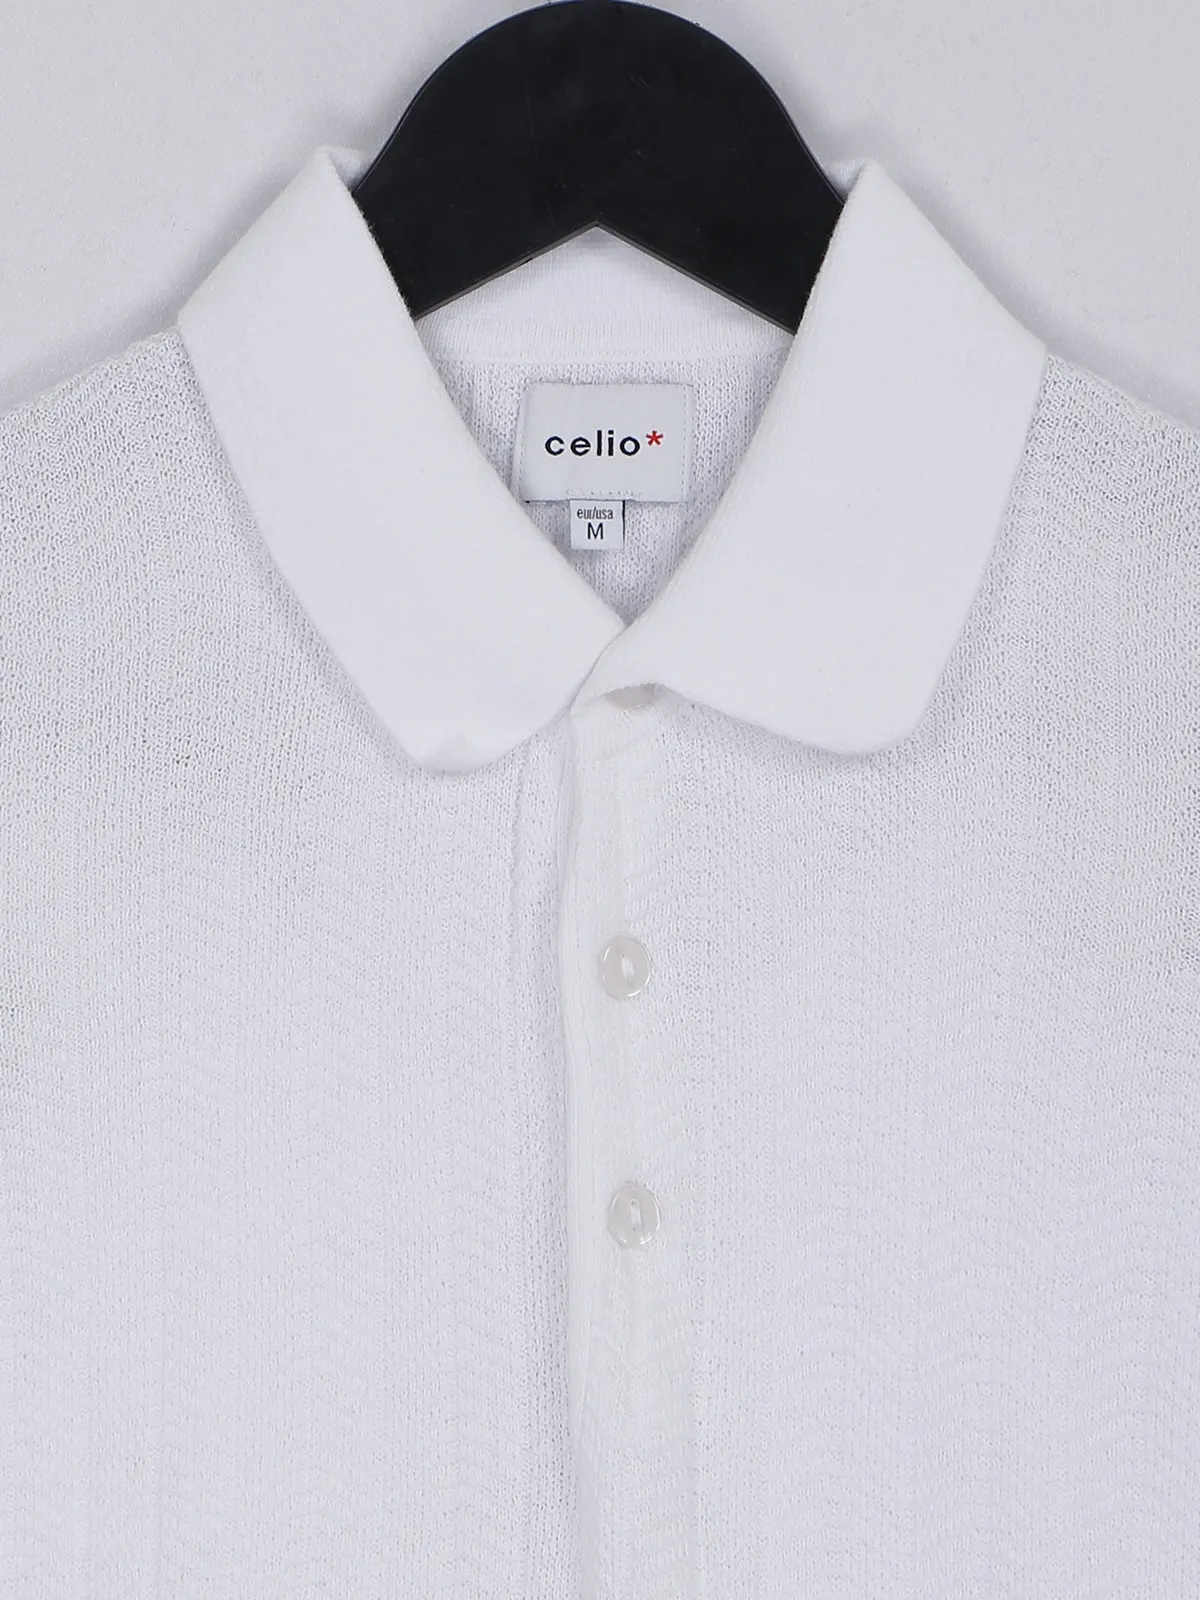 Celio knitted t shirt in white